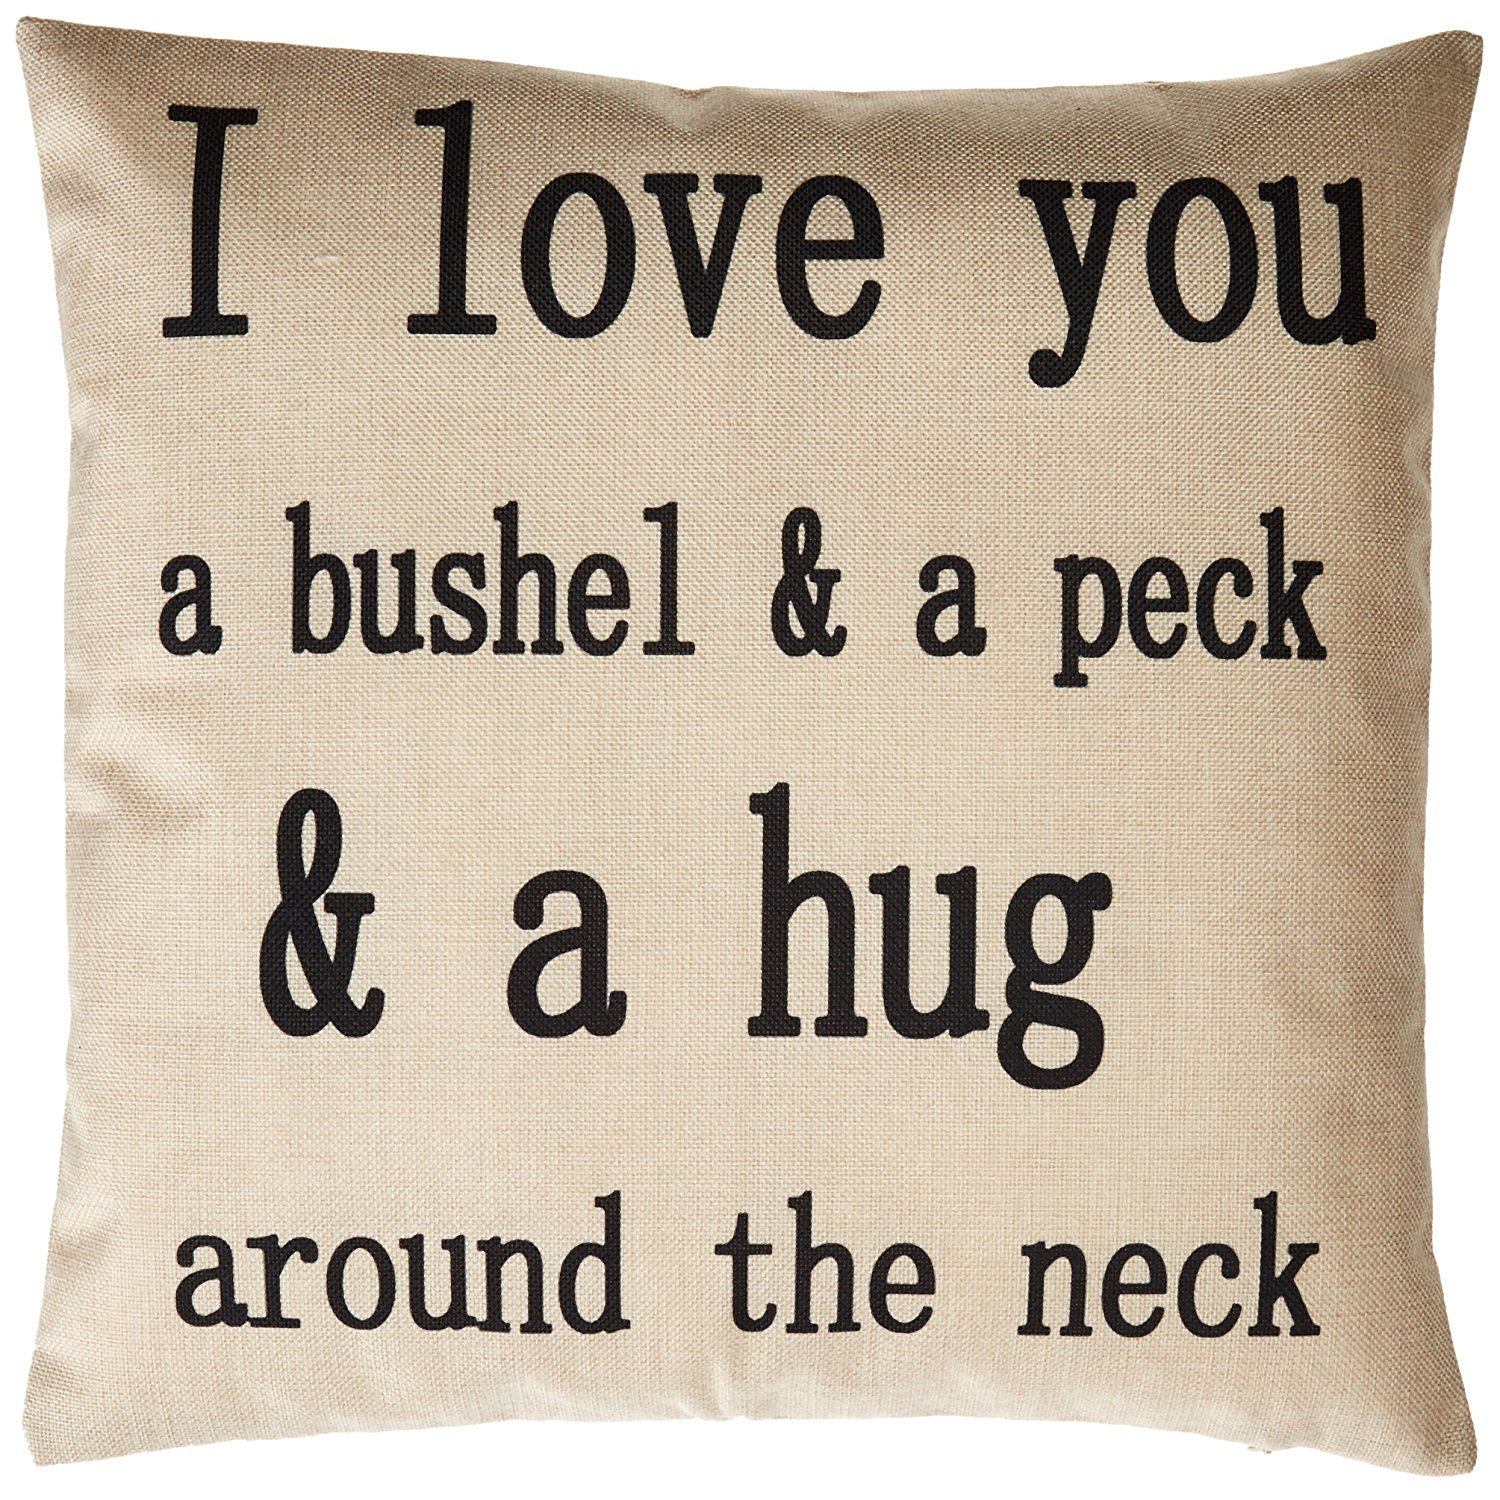 I Love You a Bushel and a Peck Throw Pillow Cover Only $1.59 + Cheap Pillow Inserts on Amazon!